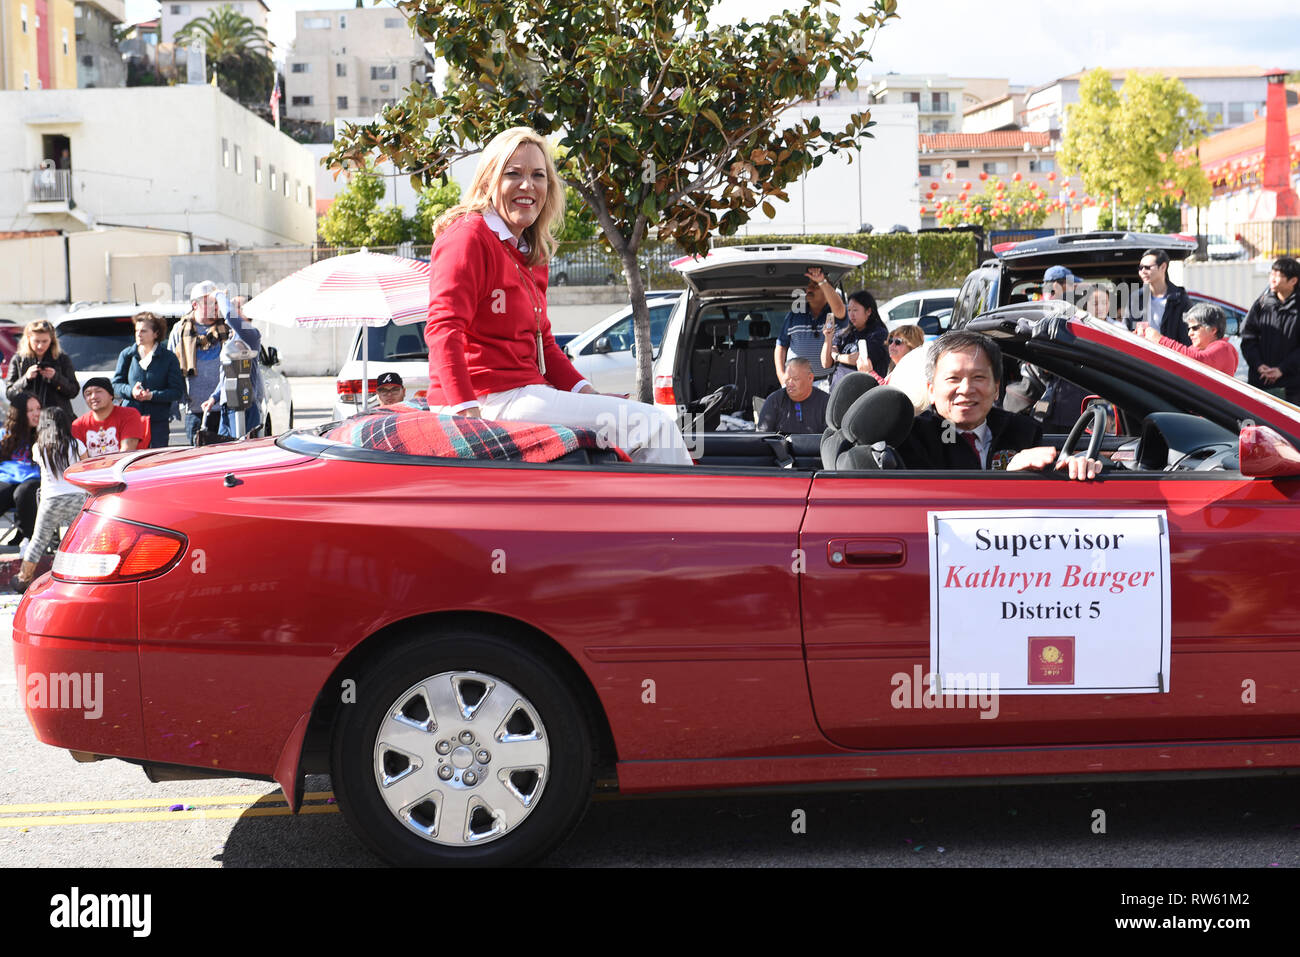 LOS ANGELES - 9 febbraio 2019: Supervisore Kathryn Barger giostre in Los Angeles Nuovo Anno Cinese Parade. Foto Stock